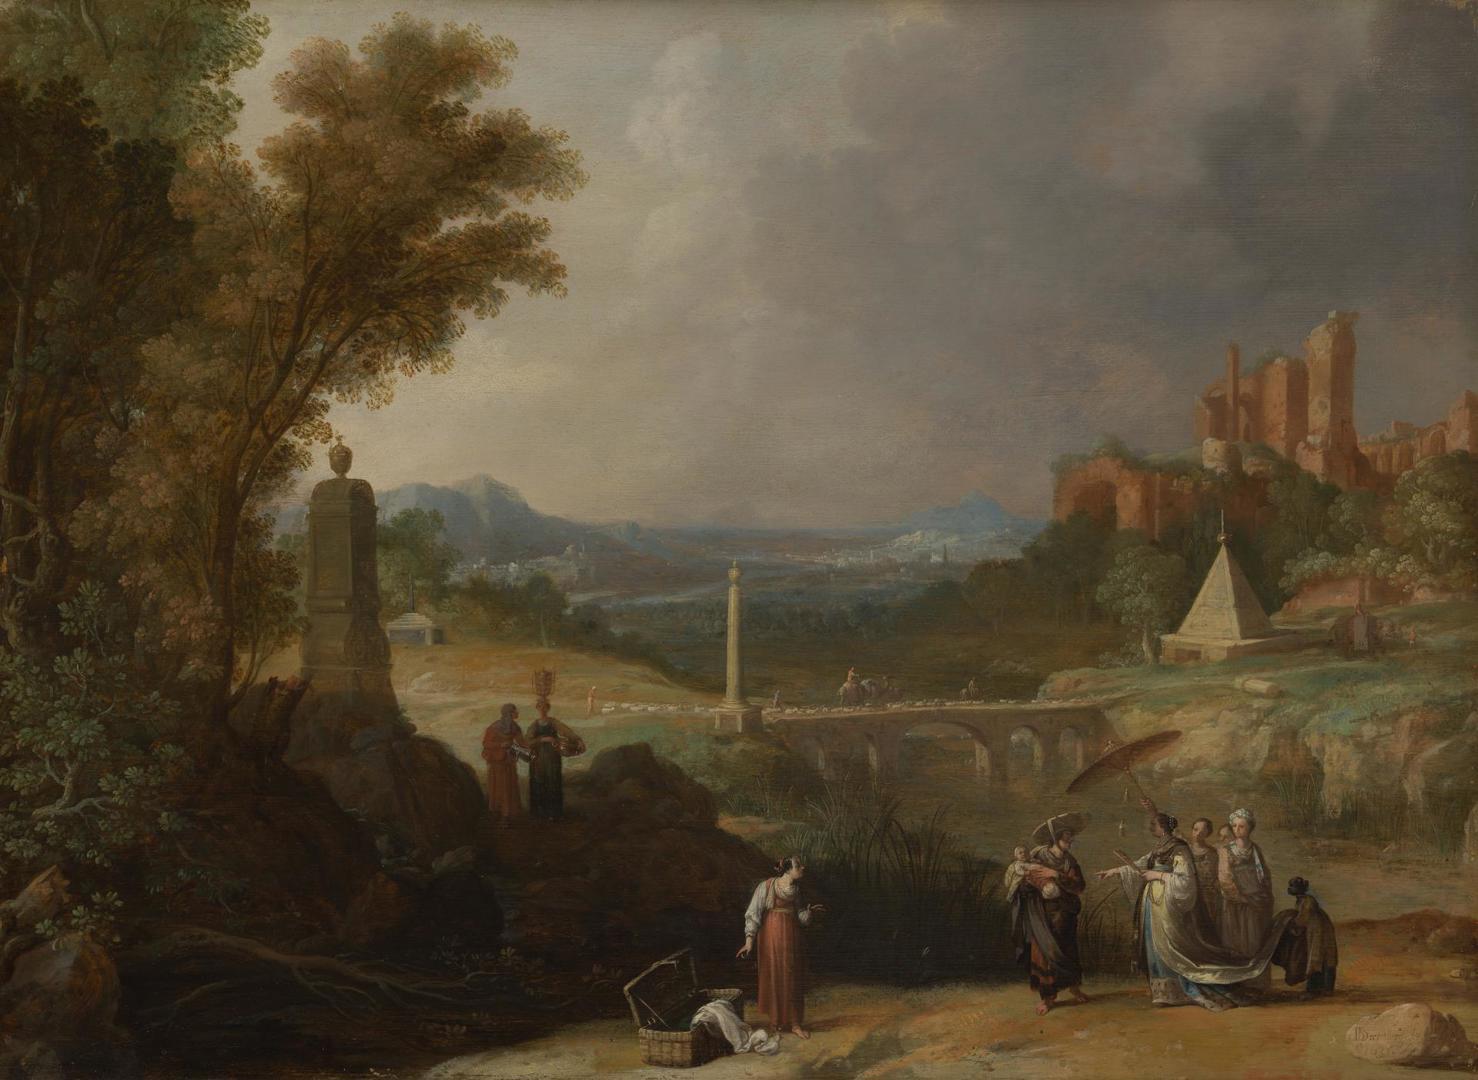 The Finding of the Infant Moses by Pharaoh's Daughter by Bartholomeus Breenbergh